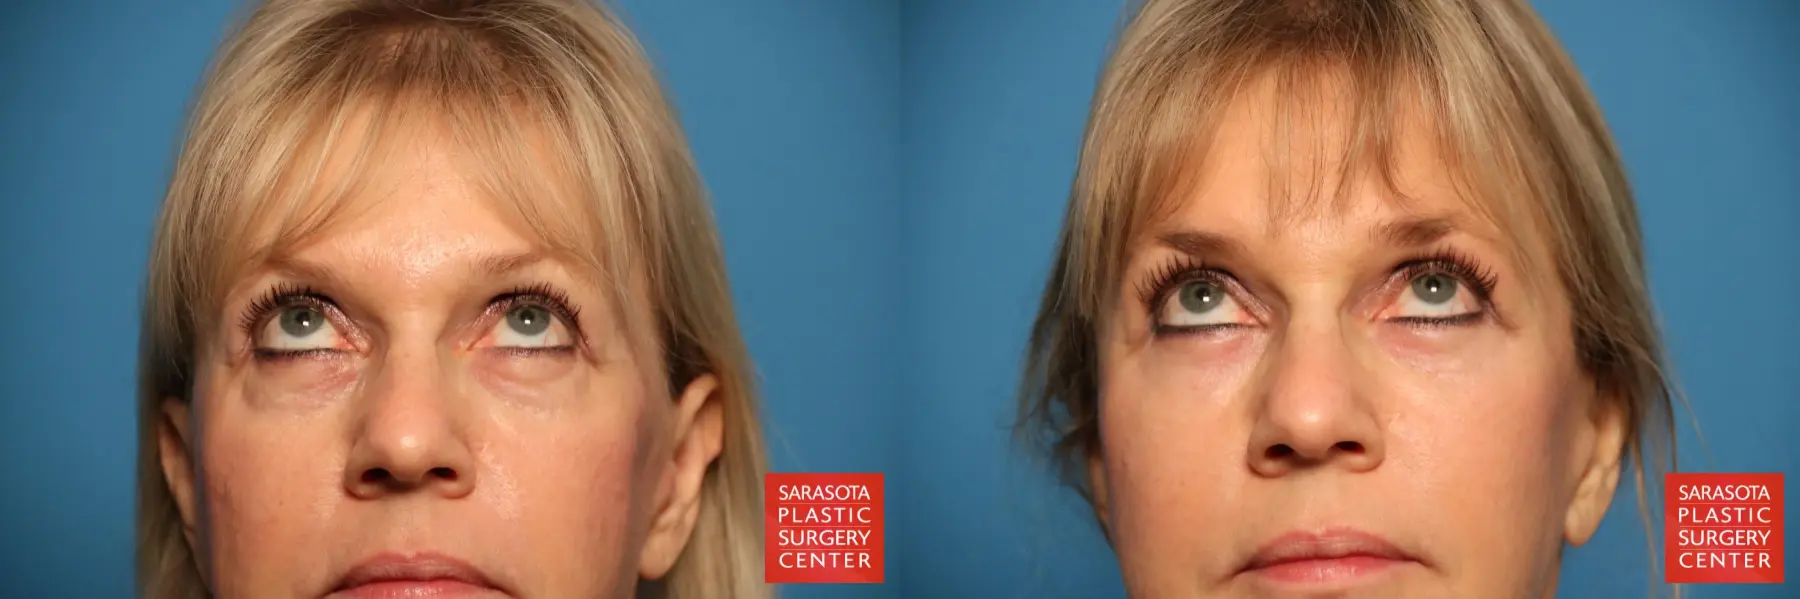 Eyelid Lift: Patient 7 - Before and After 3